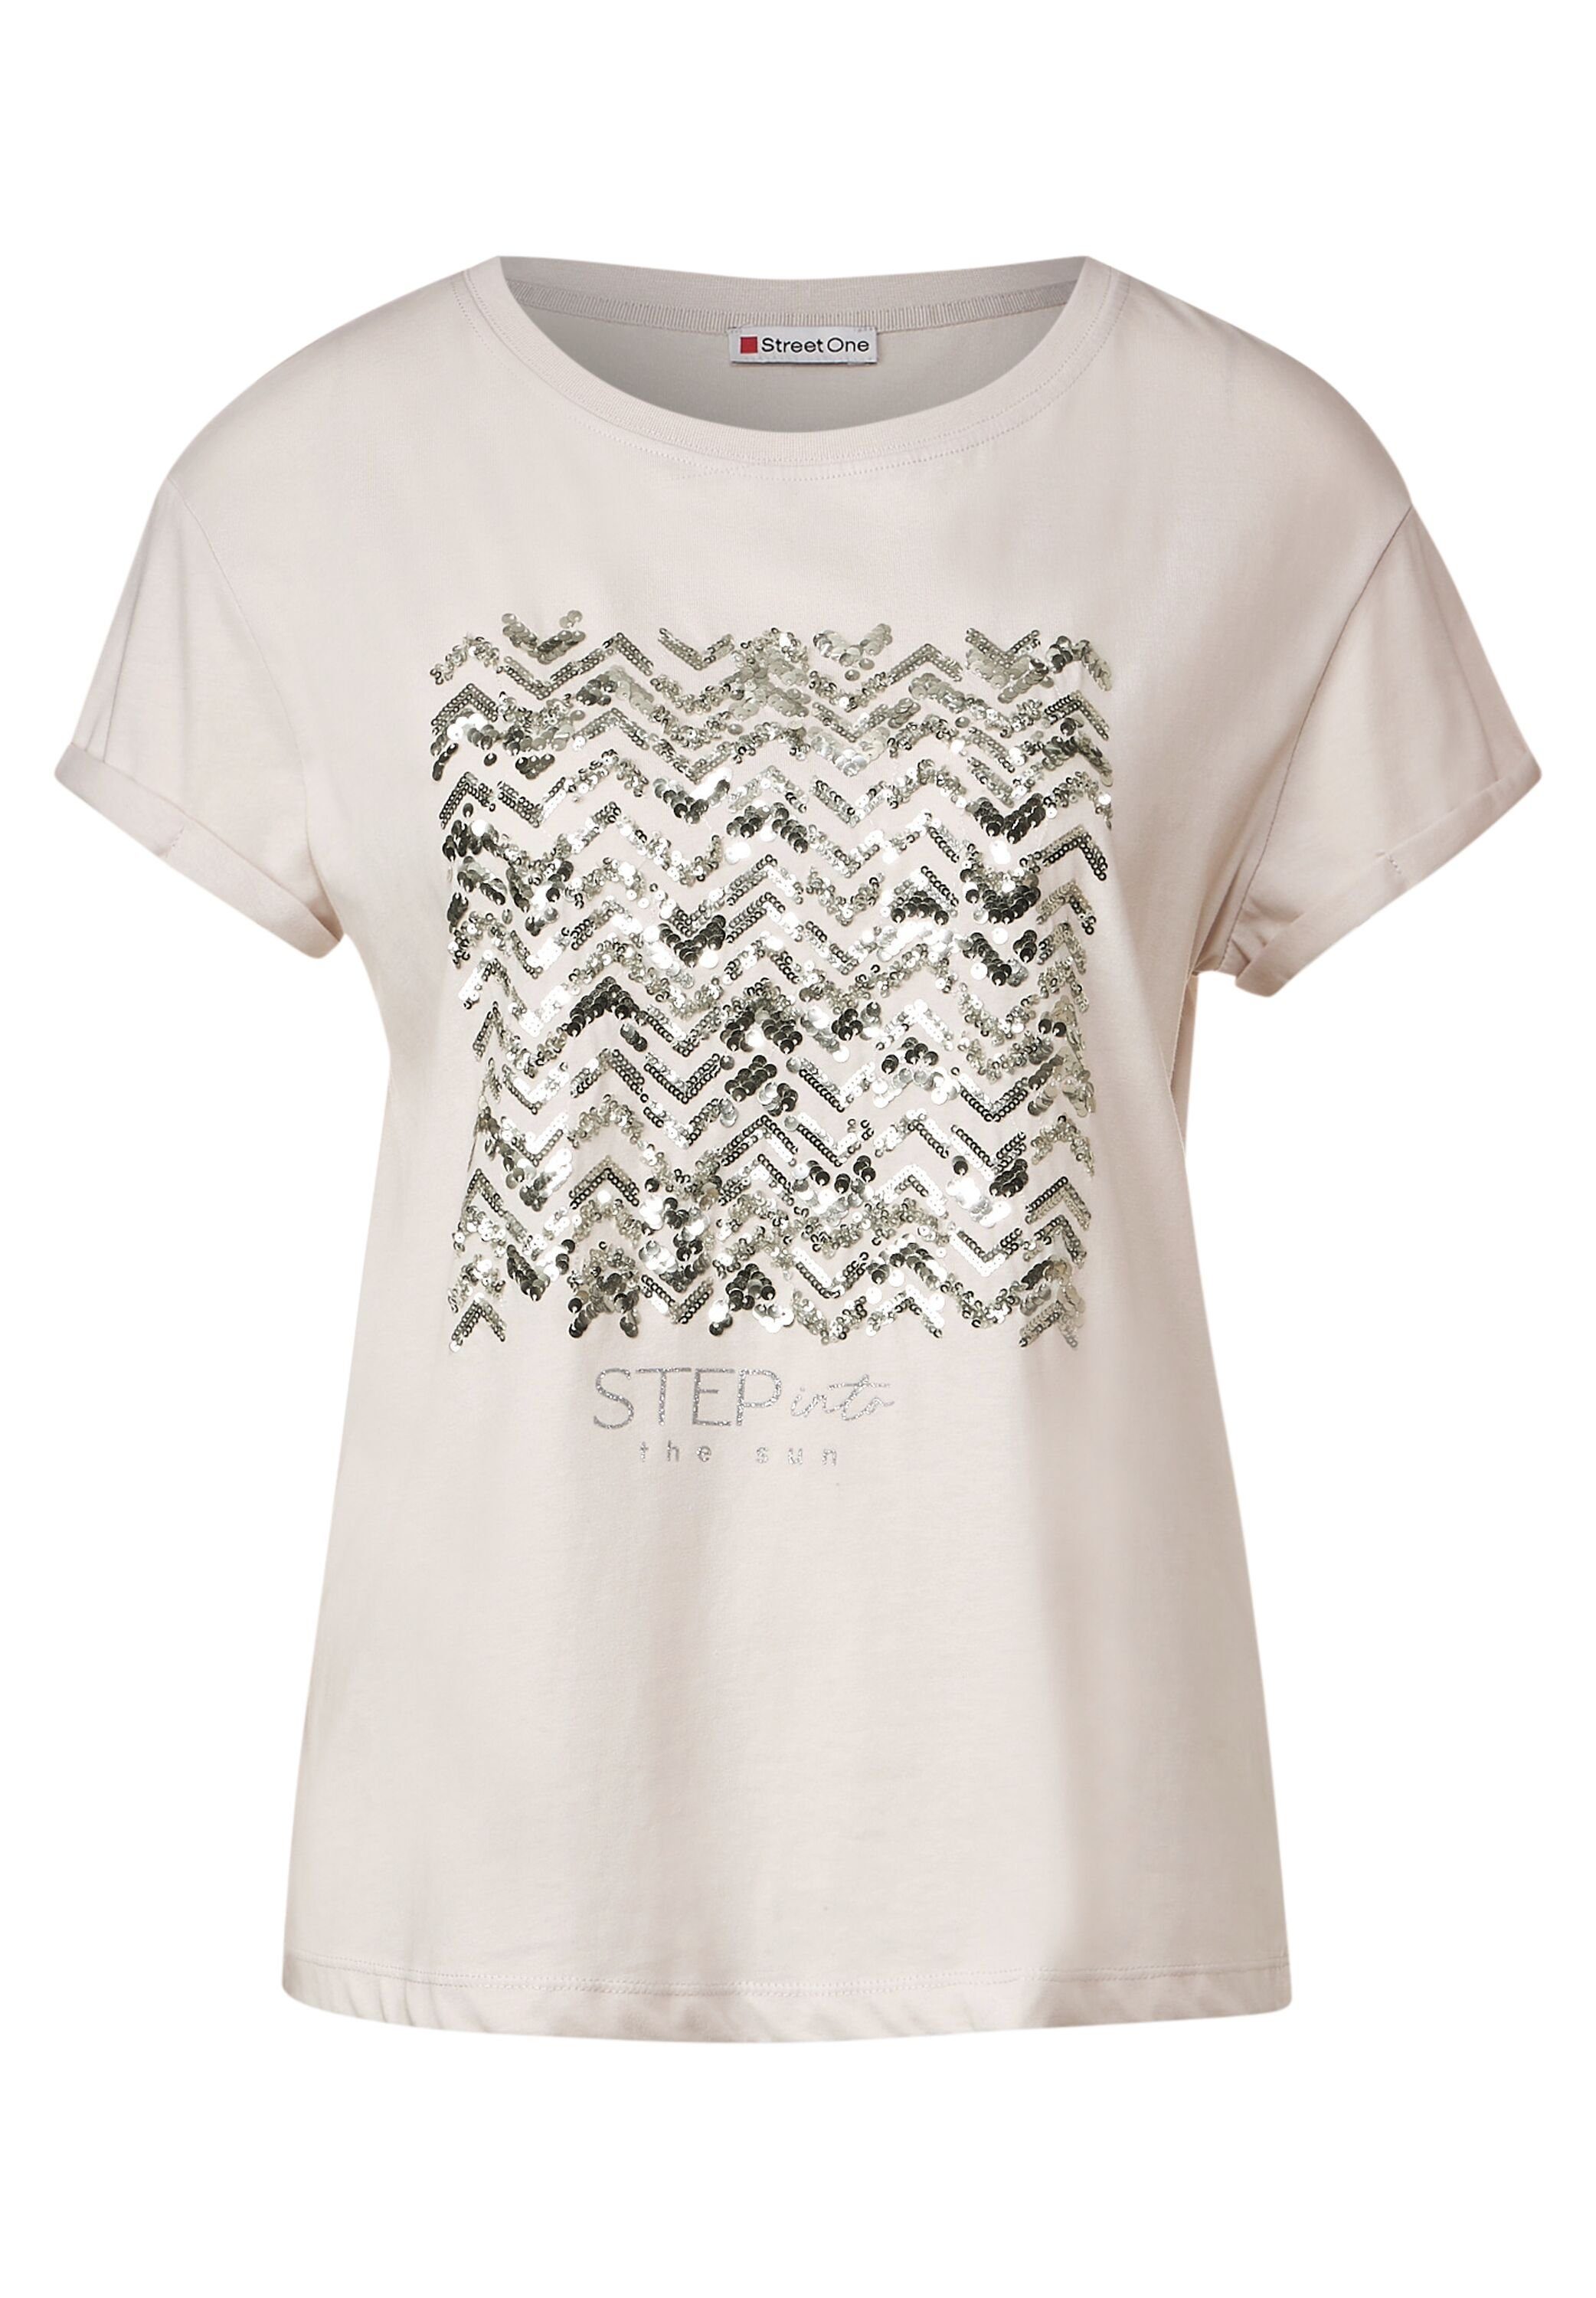 smooth in sand STREET T-Shirt Unifarbe stone ONE